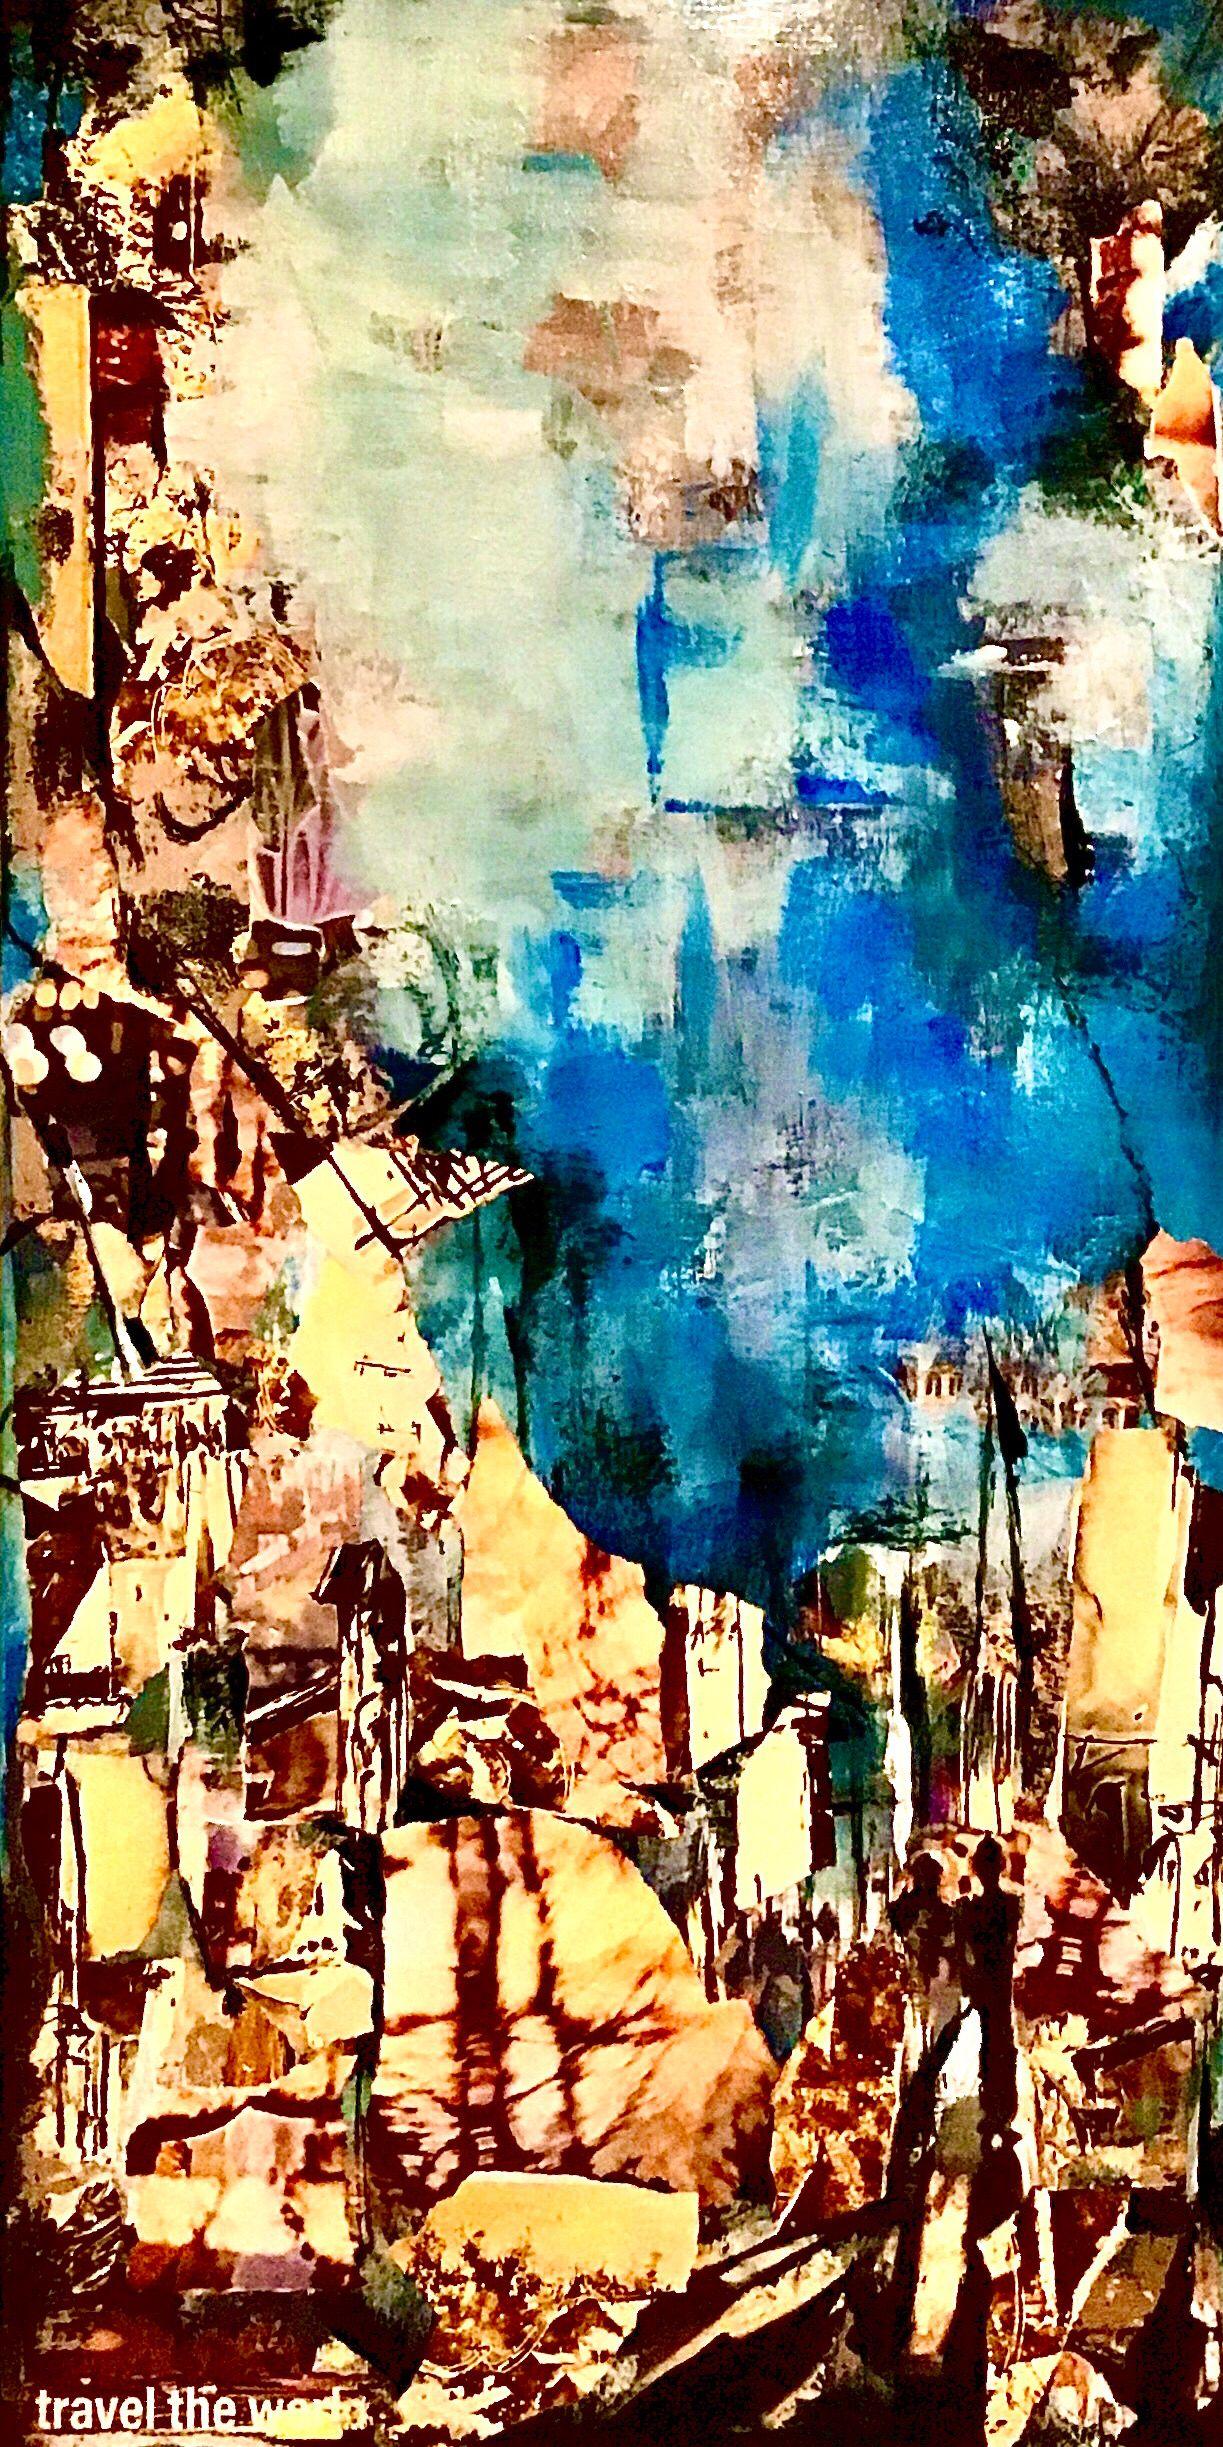 Travel The World, Mixed Media on Canvas - Mixed Media Art by Laverne Chisan